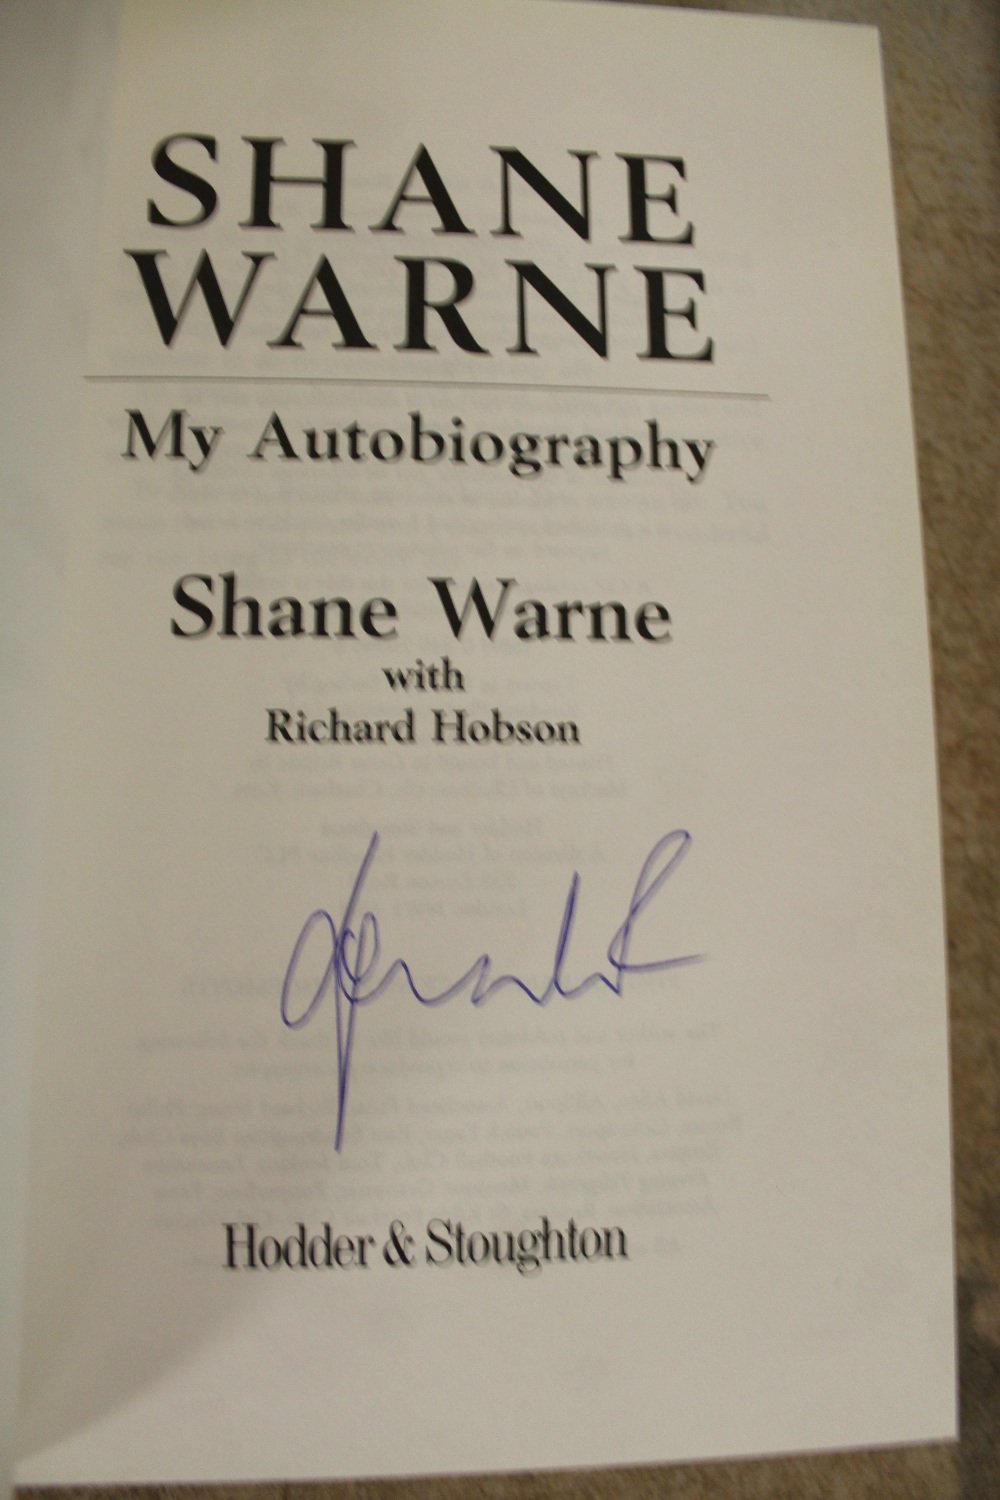 Warne [Shane] - My Autobiography, signed first edition 2001, hardback with dustwrapper - Image 2 of 2